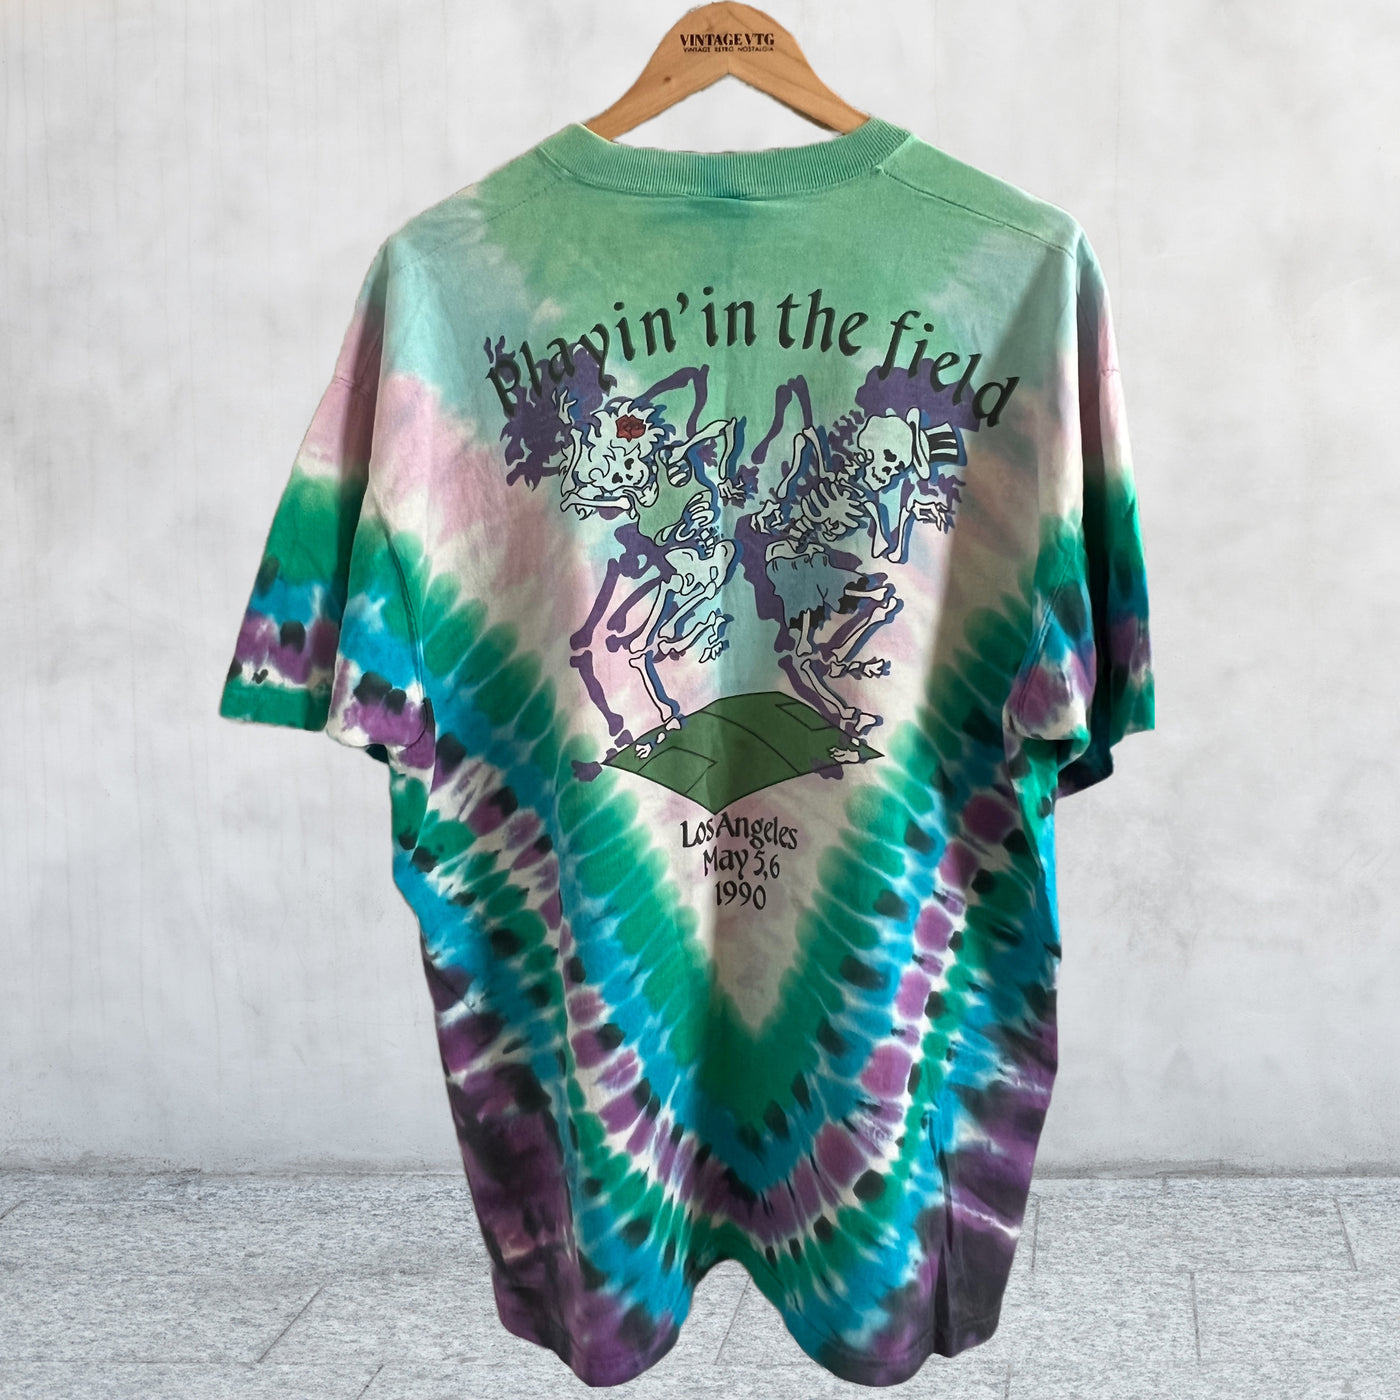 Vintage 1990 Grateful Dead Playing in The Field Los Angeles Tour T-shirt. XL back view of shirt